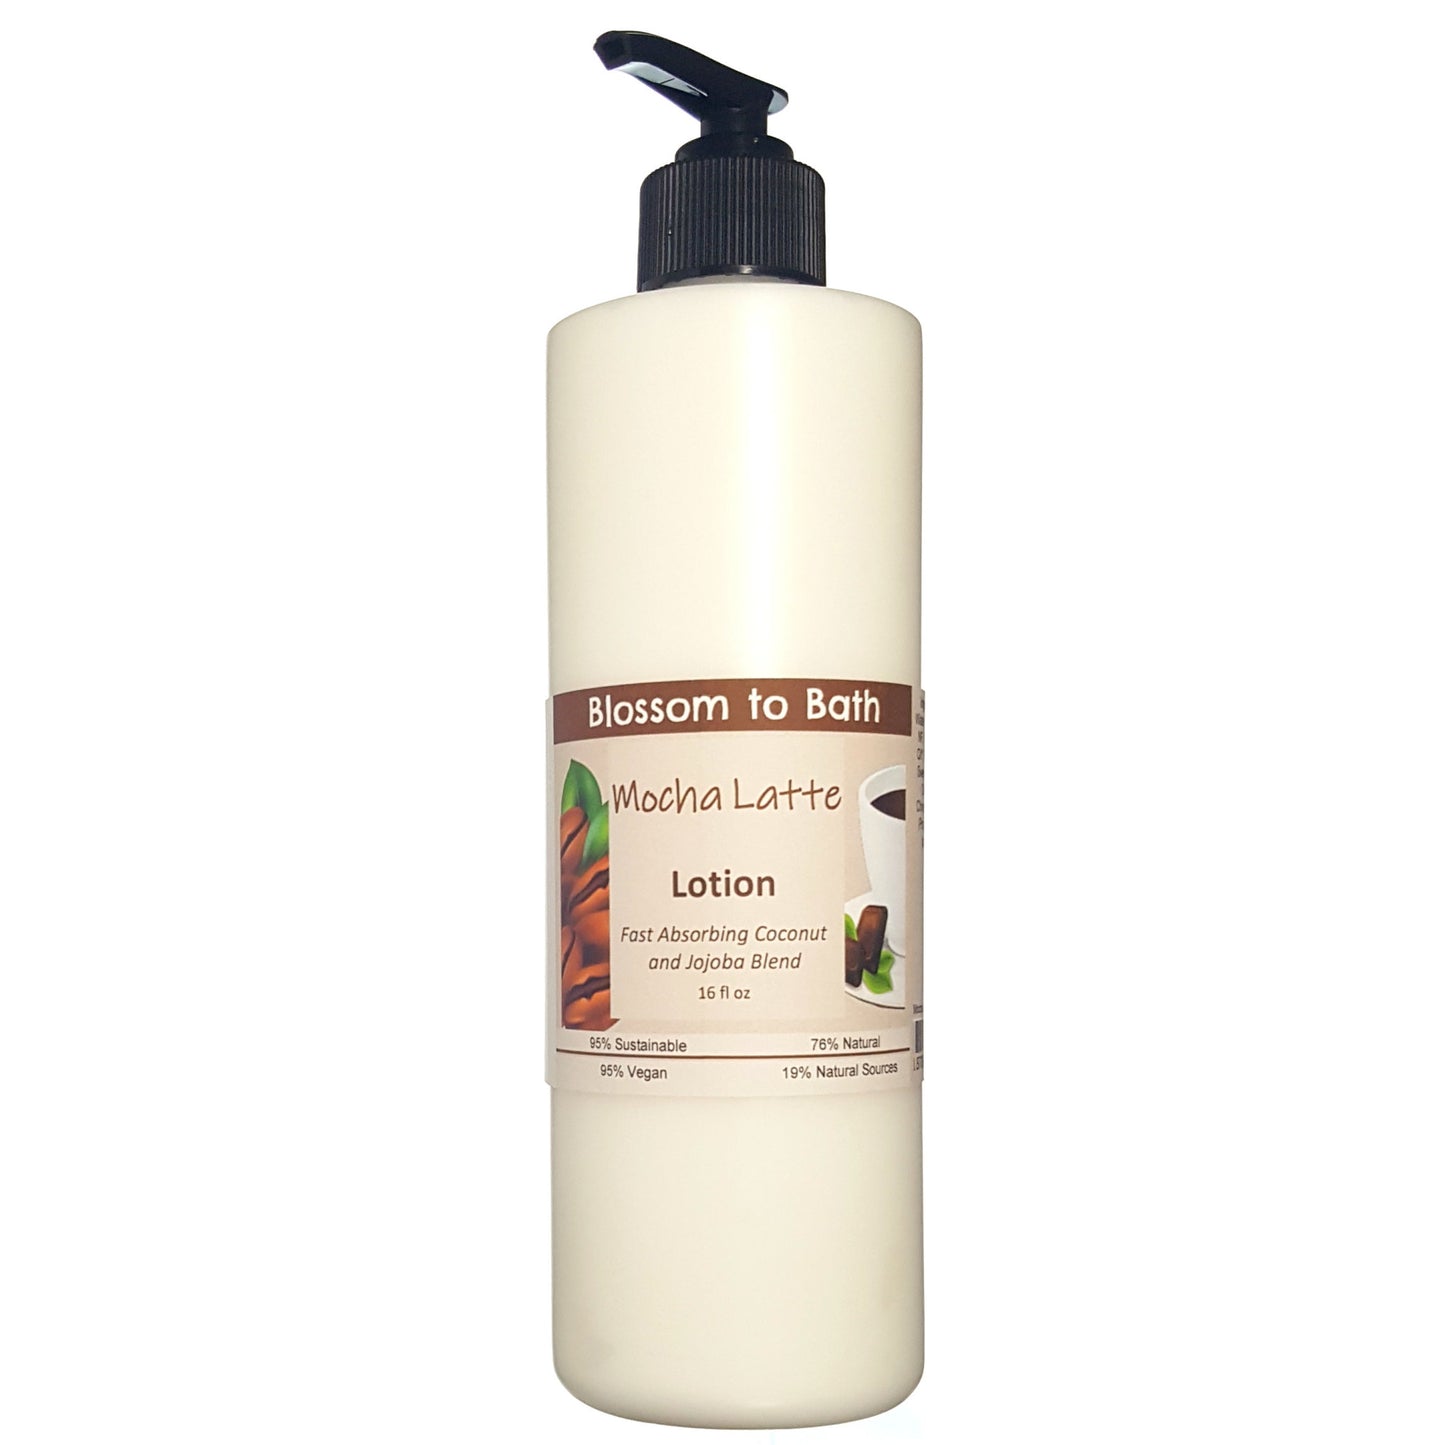 Buy Blossom to Bath Mocha Latte Lotion from Flowersong Soap Studio.  Daily moisture luxury that soaks in quickly made with organic oils and butters that soften and smooth the skin  Deep rich chocolate and fragrant coffee combine to form this gourmet coffee smell-alike scent.